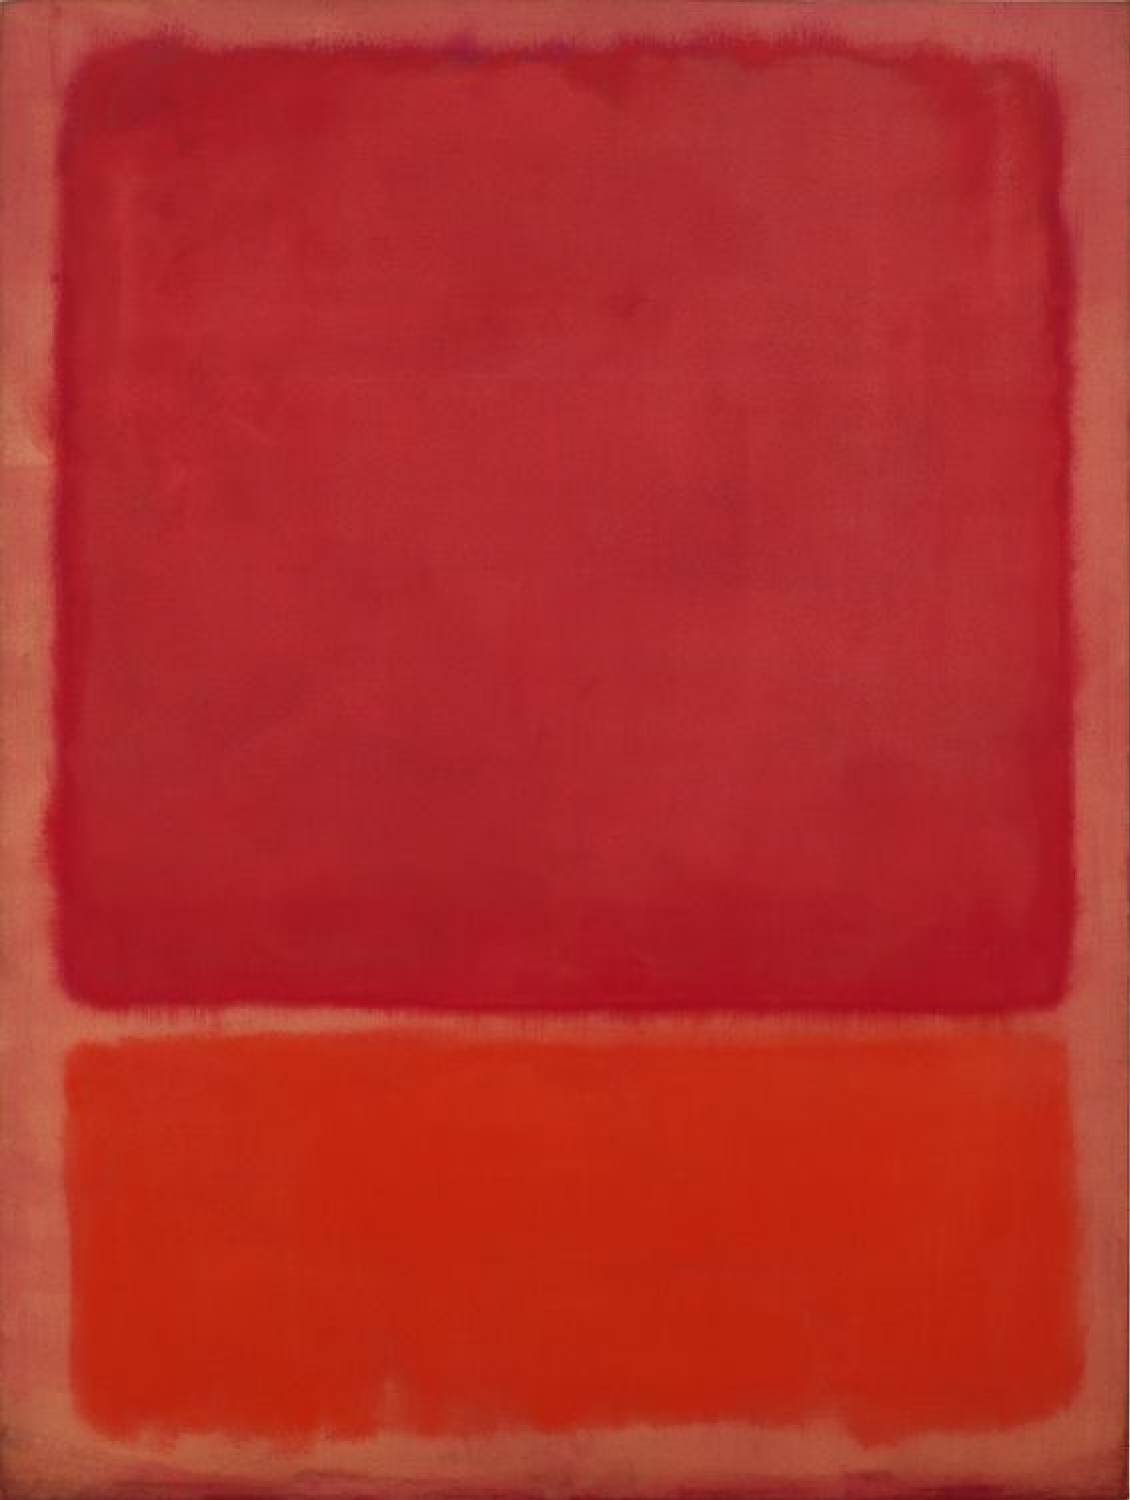 Why Are Mark Rothkos Paintings Considered Art